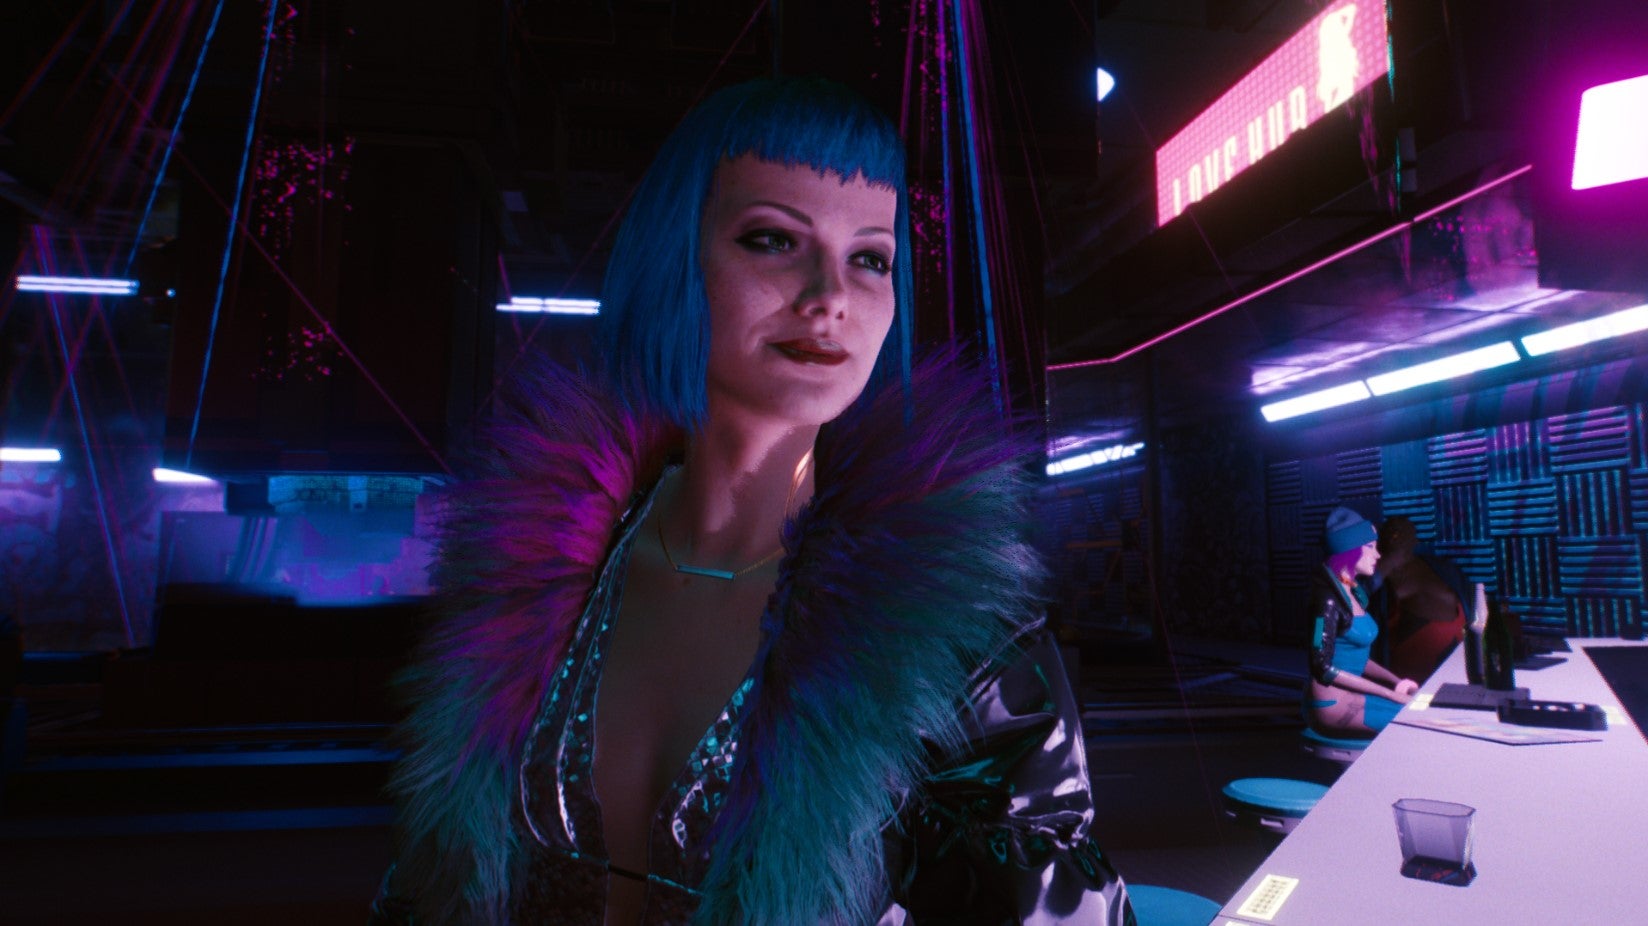 Image for Cyberpunk 2077 hotfix targets save file bug on PC